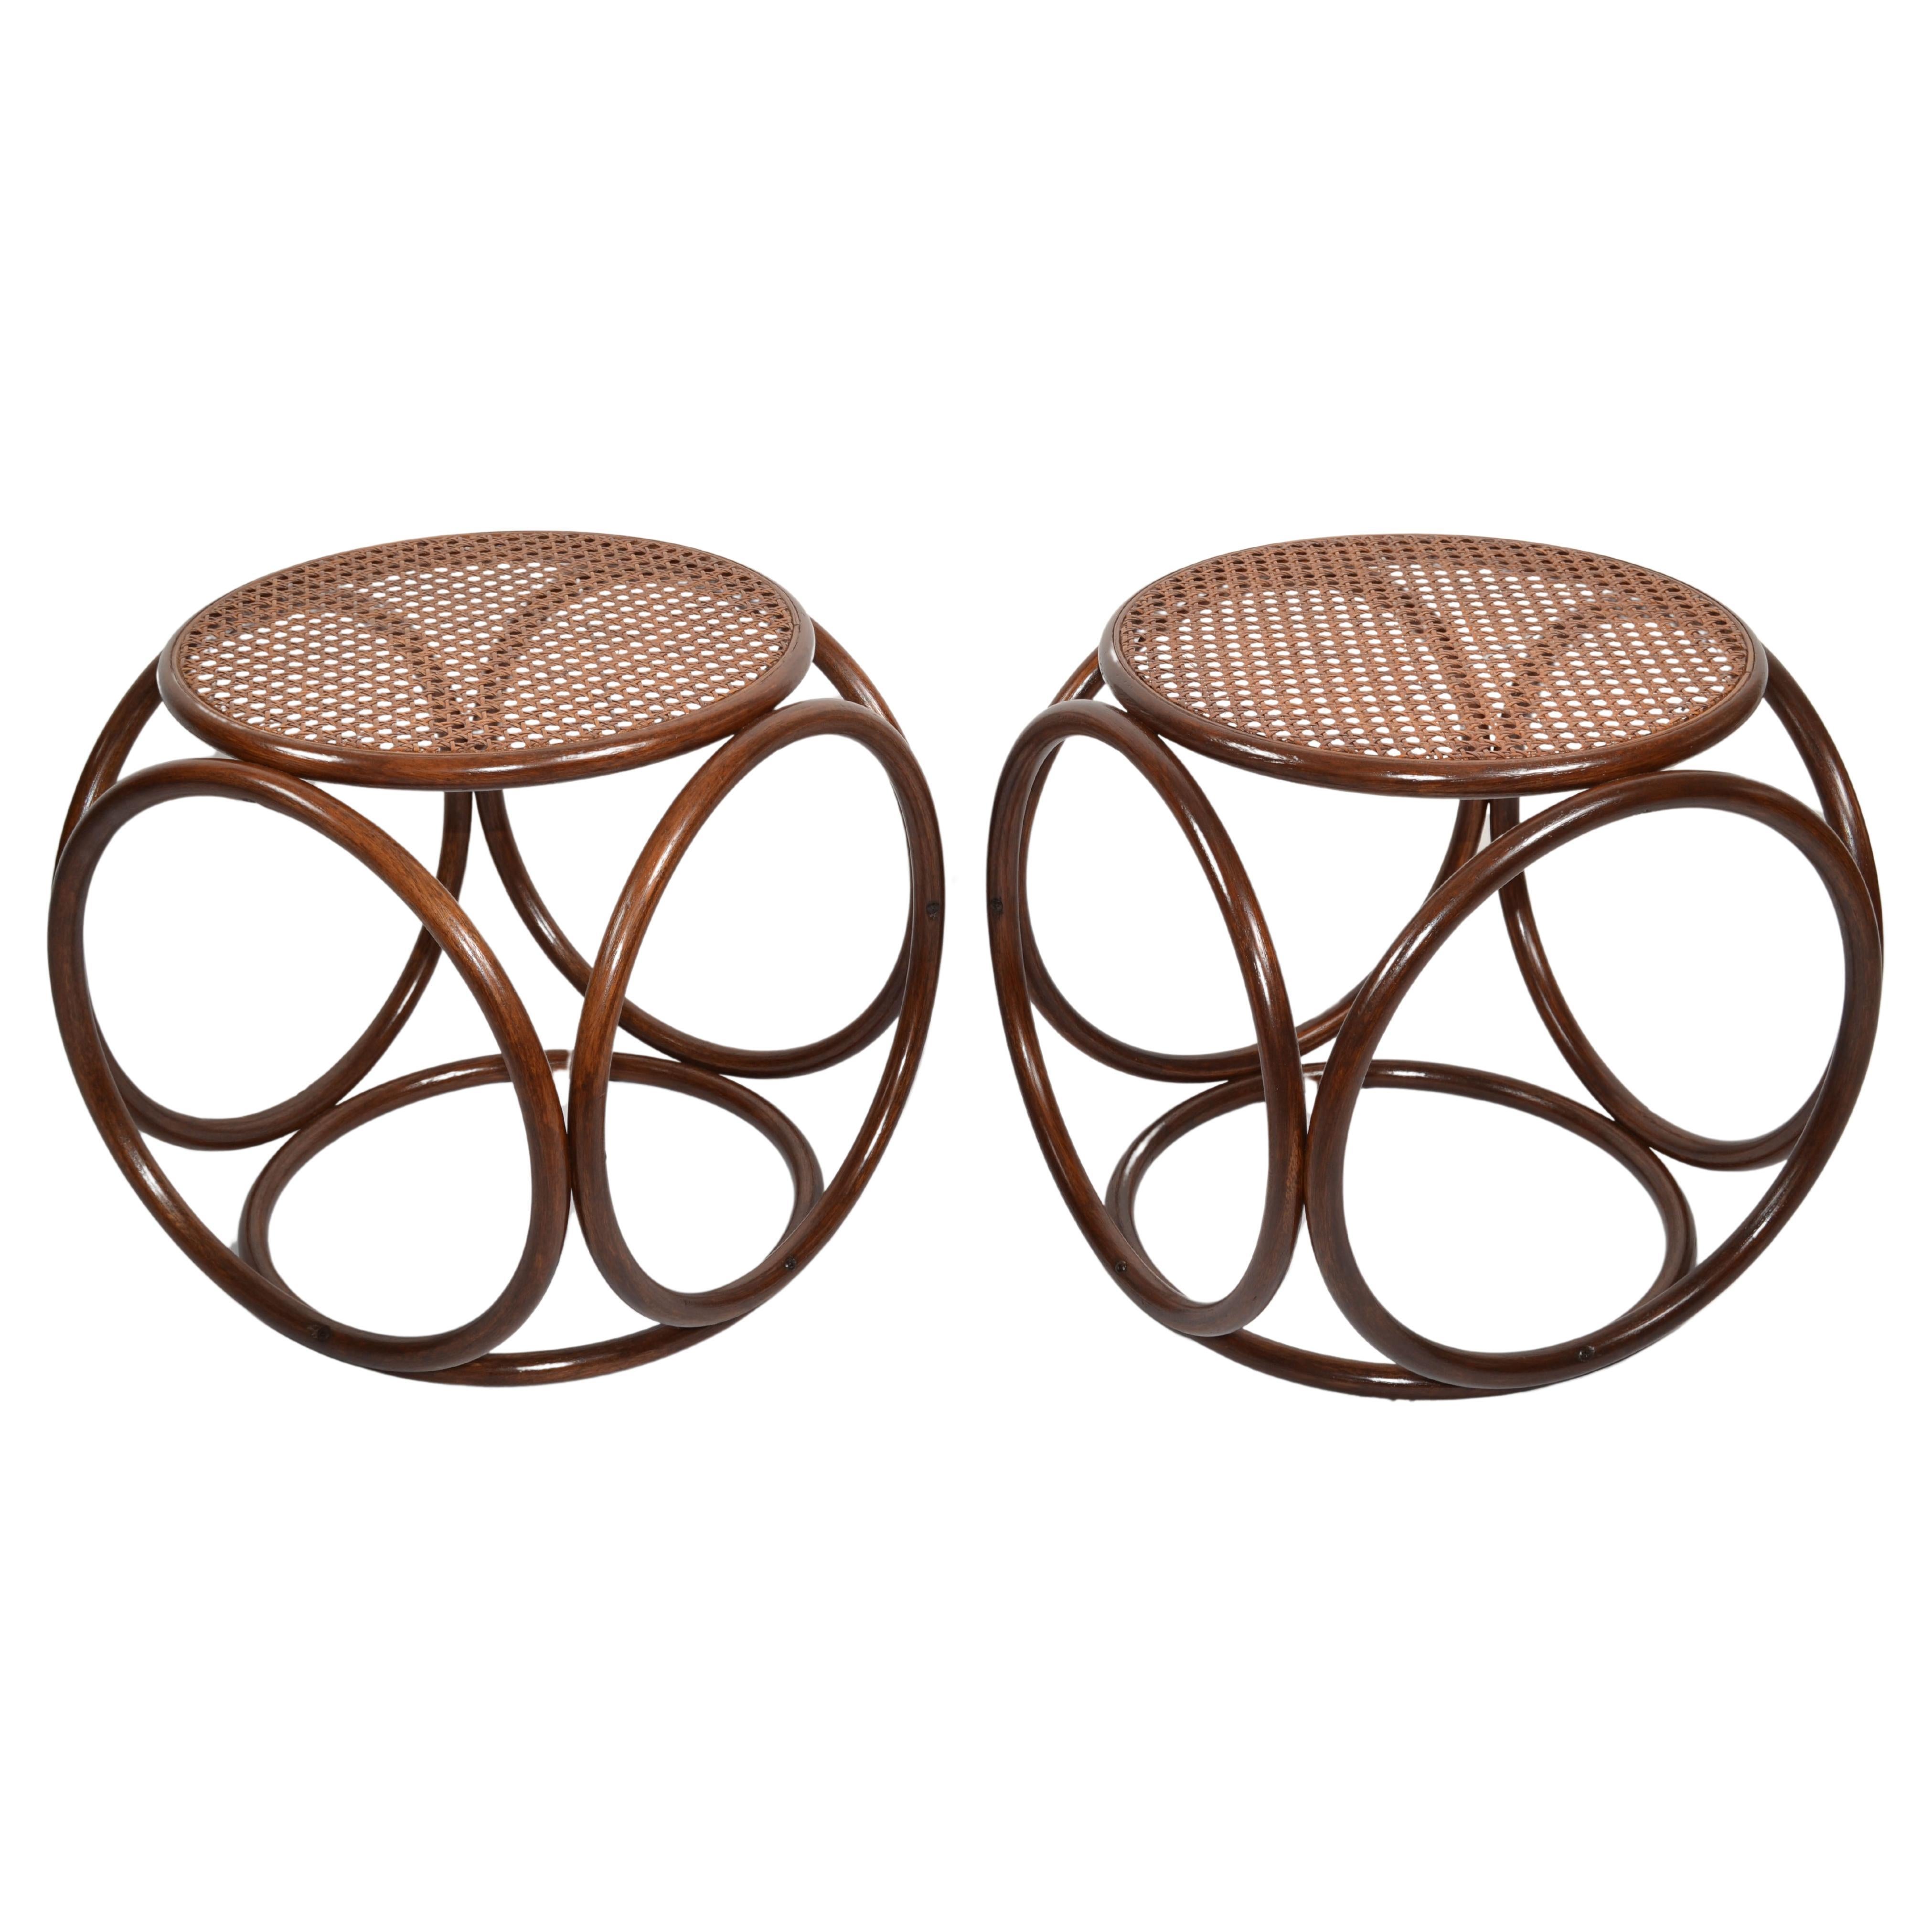 2 Michael Thonet Bentwood Cane Stool Ottoman Side Table End Table Rustic Austria